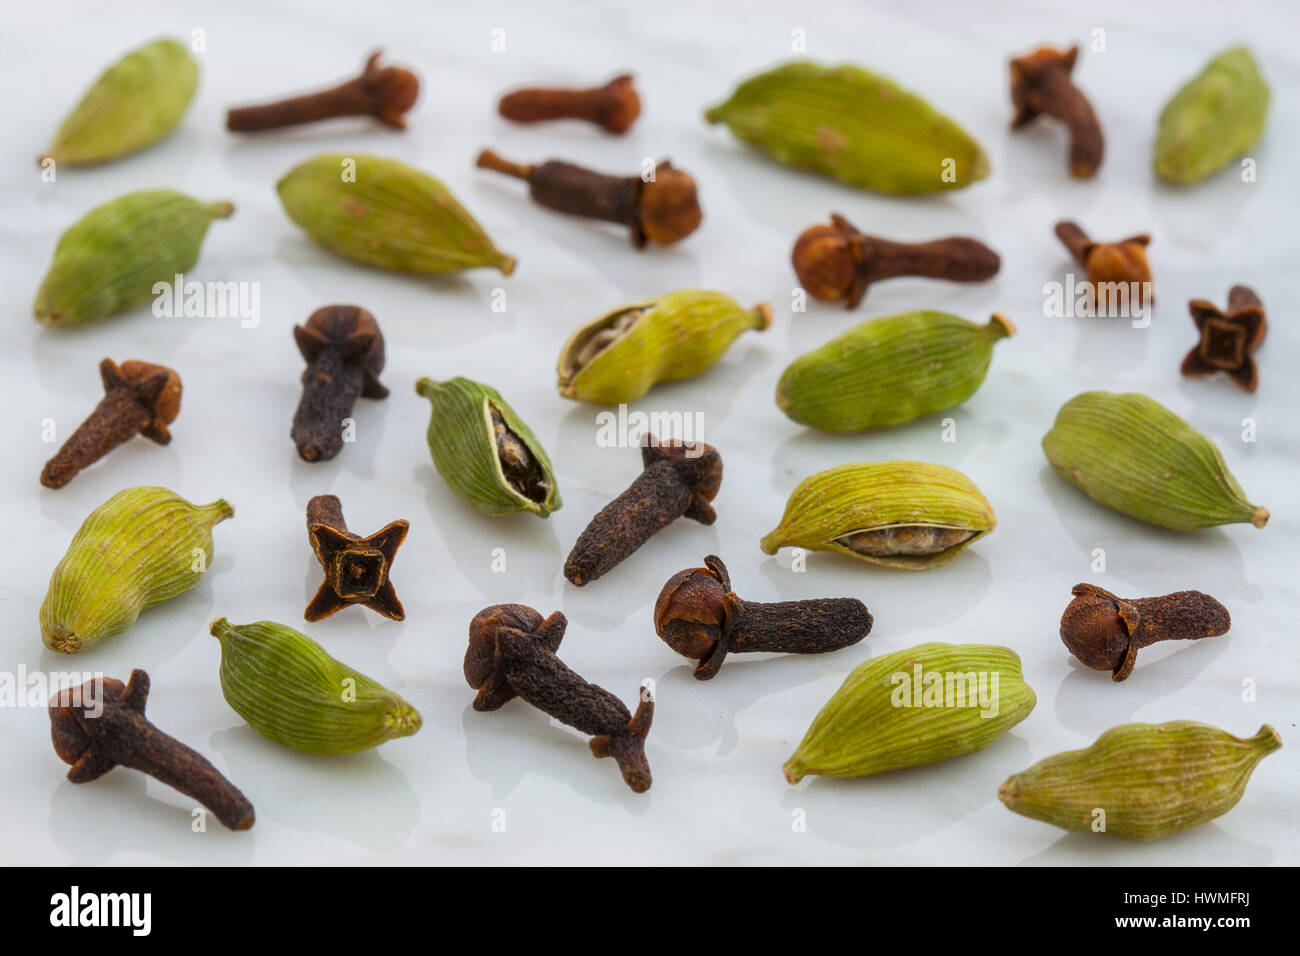 beautiful cardamom pods and cloves on top of carrara marble coutertop Stock Photo